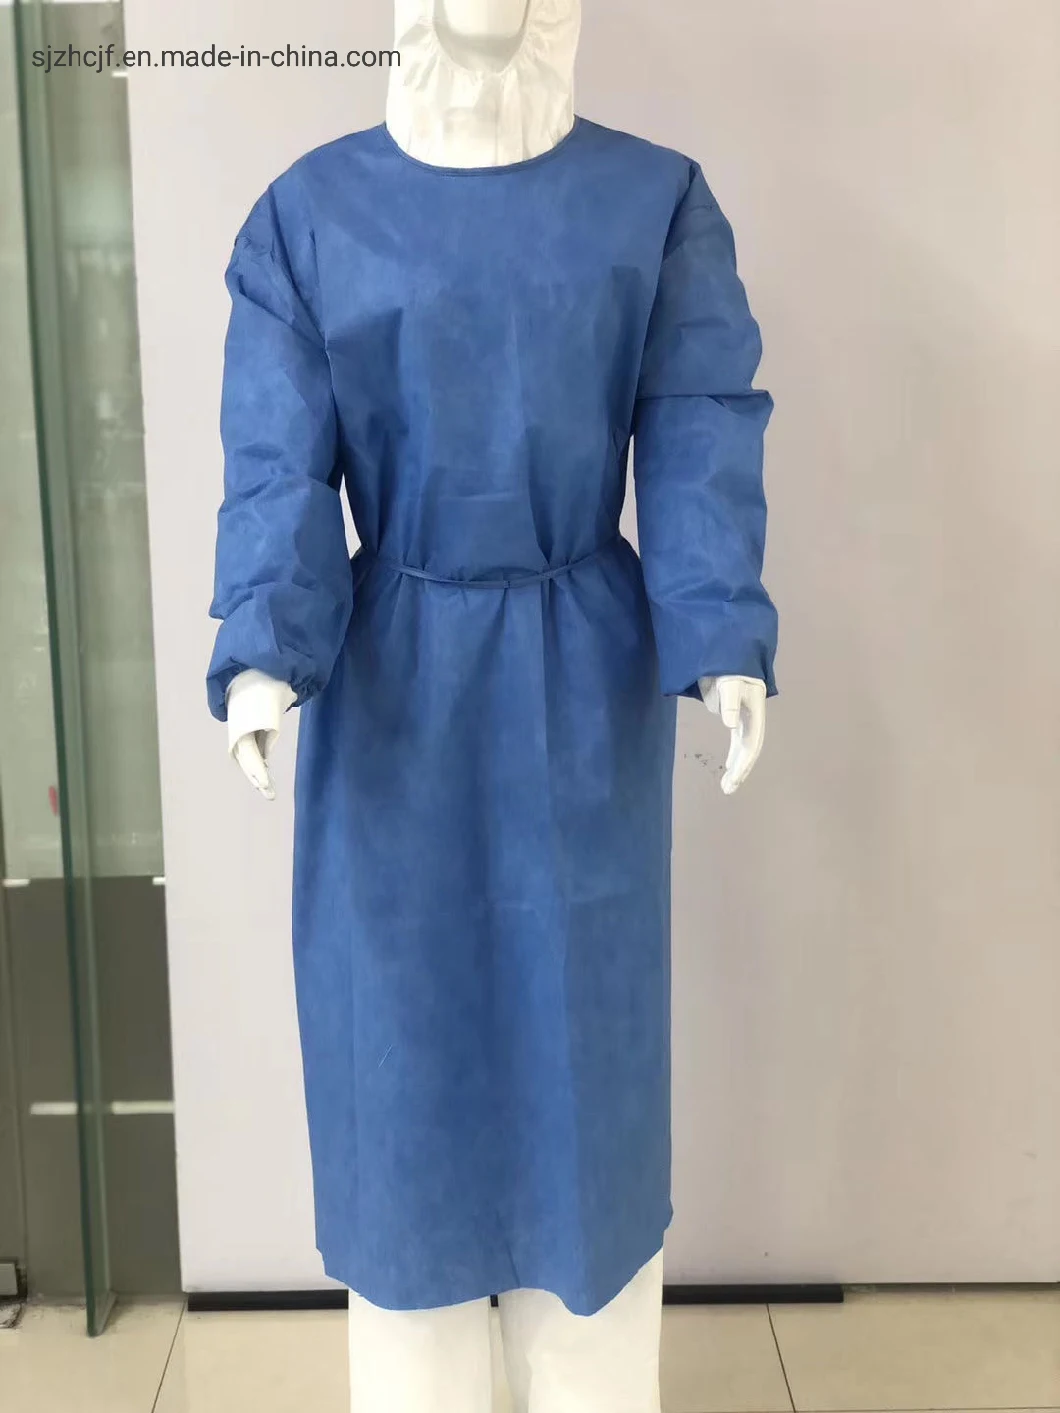 First Class Operating Suit Nonwoven Material Level